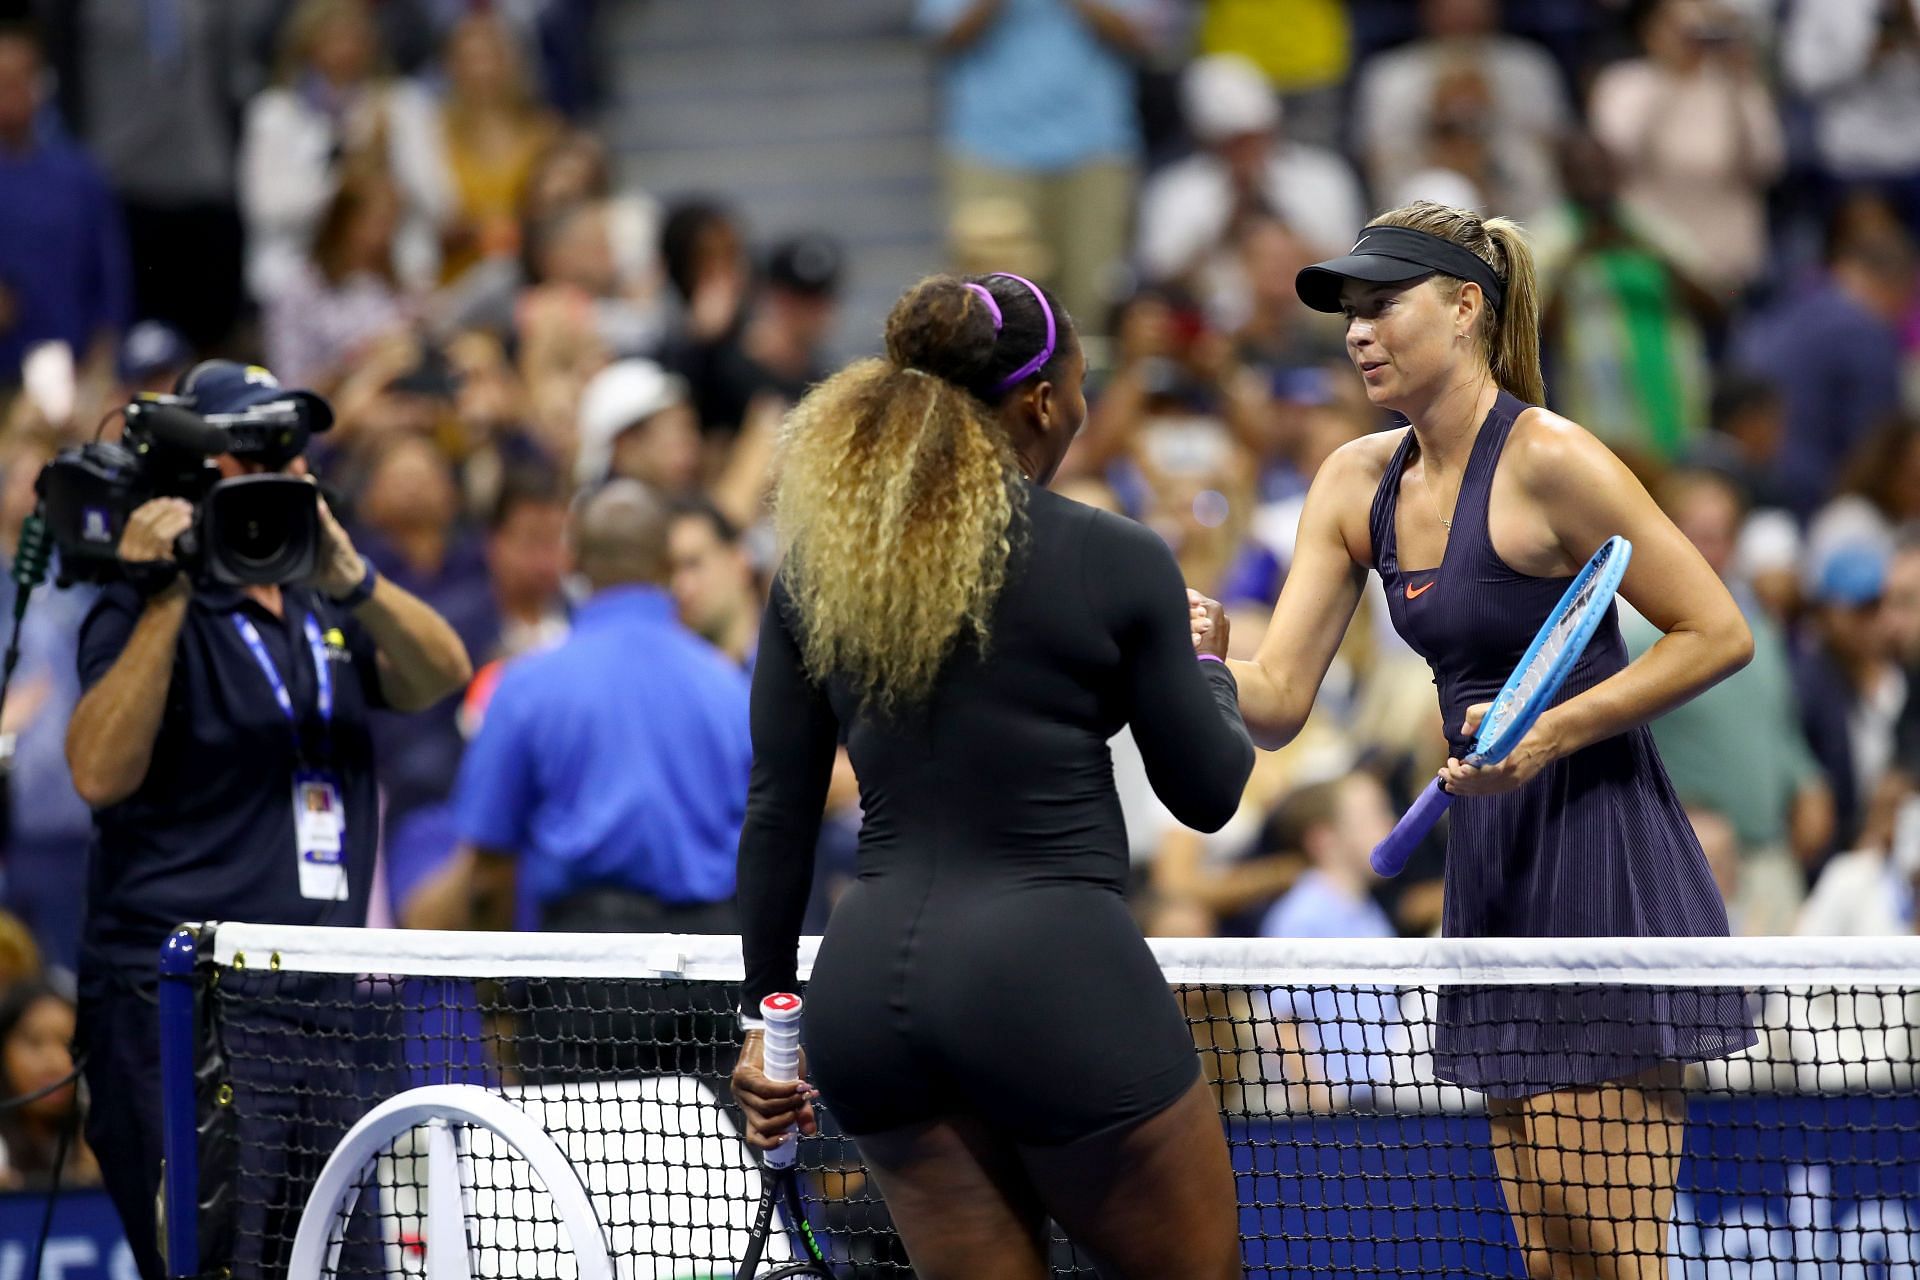 Maria Sharapova and Serena Williams after their match at the 2019 US Open.